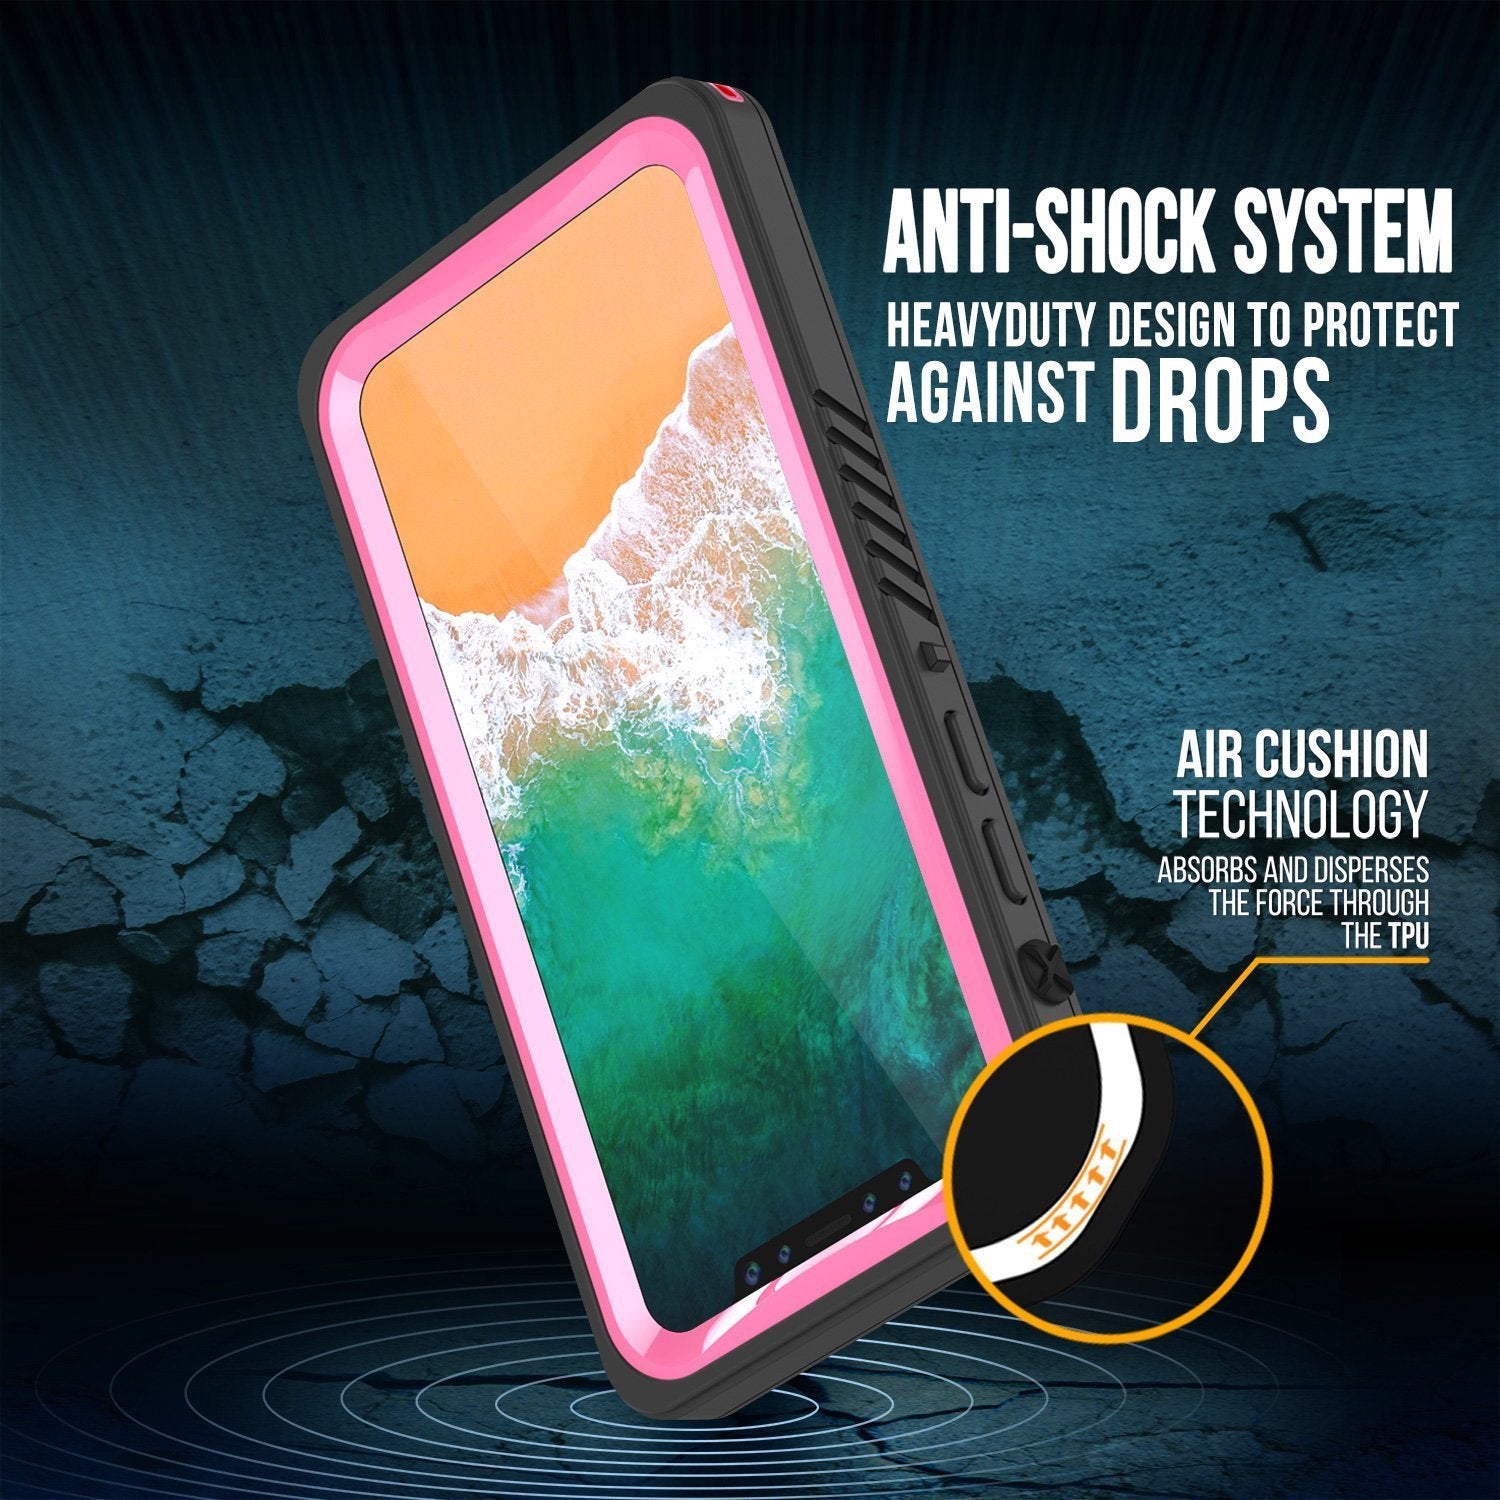 iPhone XS Max Waterproof Case, Punkcase [Extreme Series] Armor Cover W/ Built In Screen Protector [Pink] - PunkCase NZ